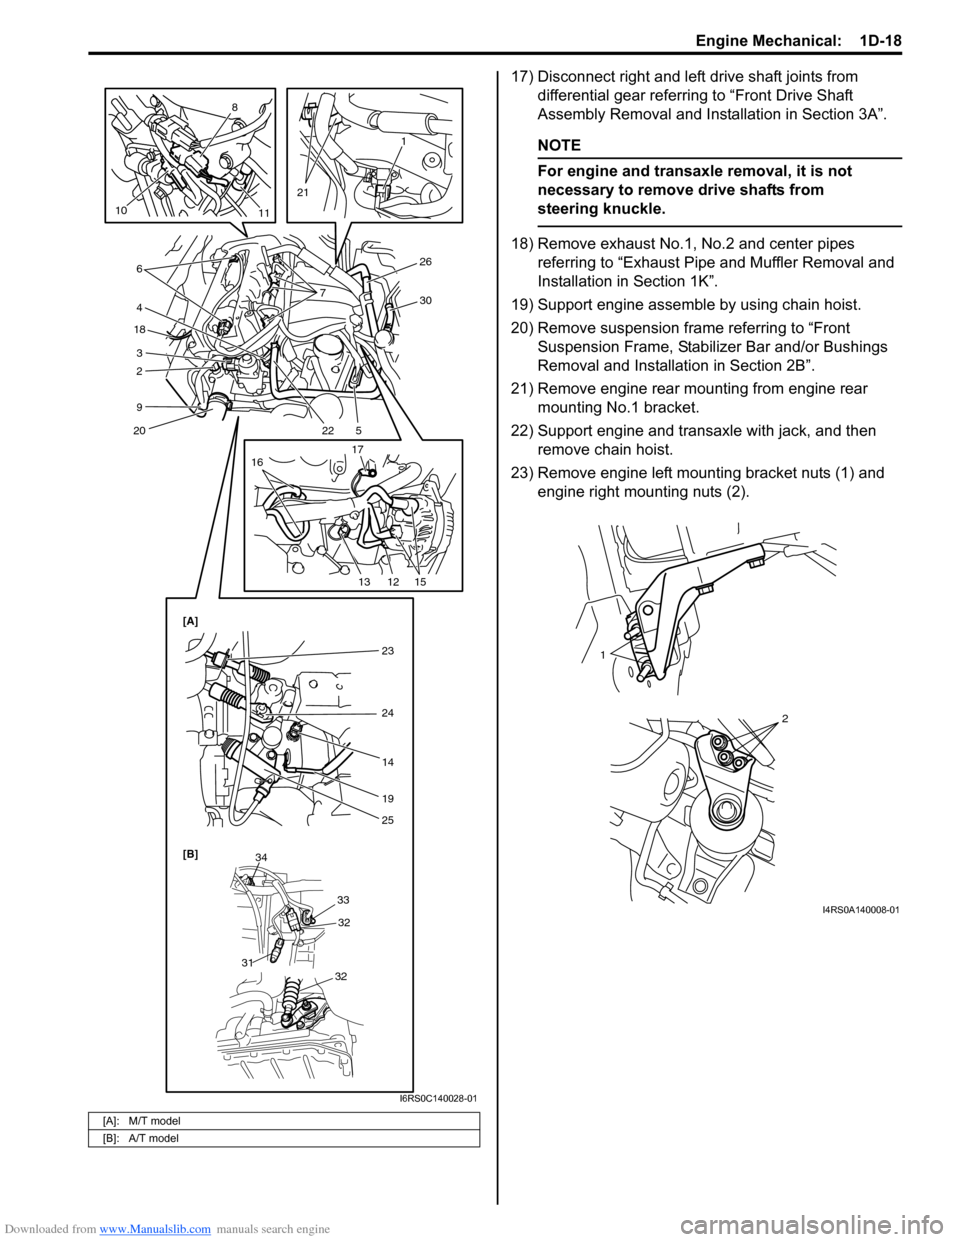 SUZUKI SWIFT 2007 2.G Service User Guide Downloaded from www.Manualslib.com manuals search engine Engine Mechanical:  1D-18
17) Disconnect right and left drive shaft joints from differential gear referring to “Front Drive Shaft 
Assembly R